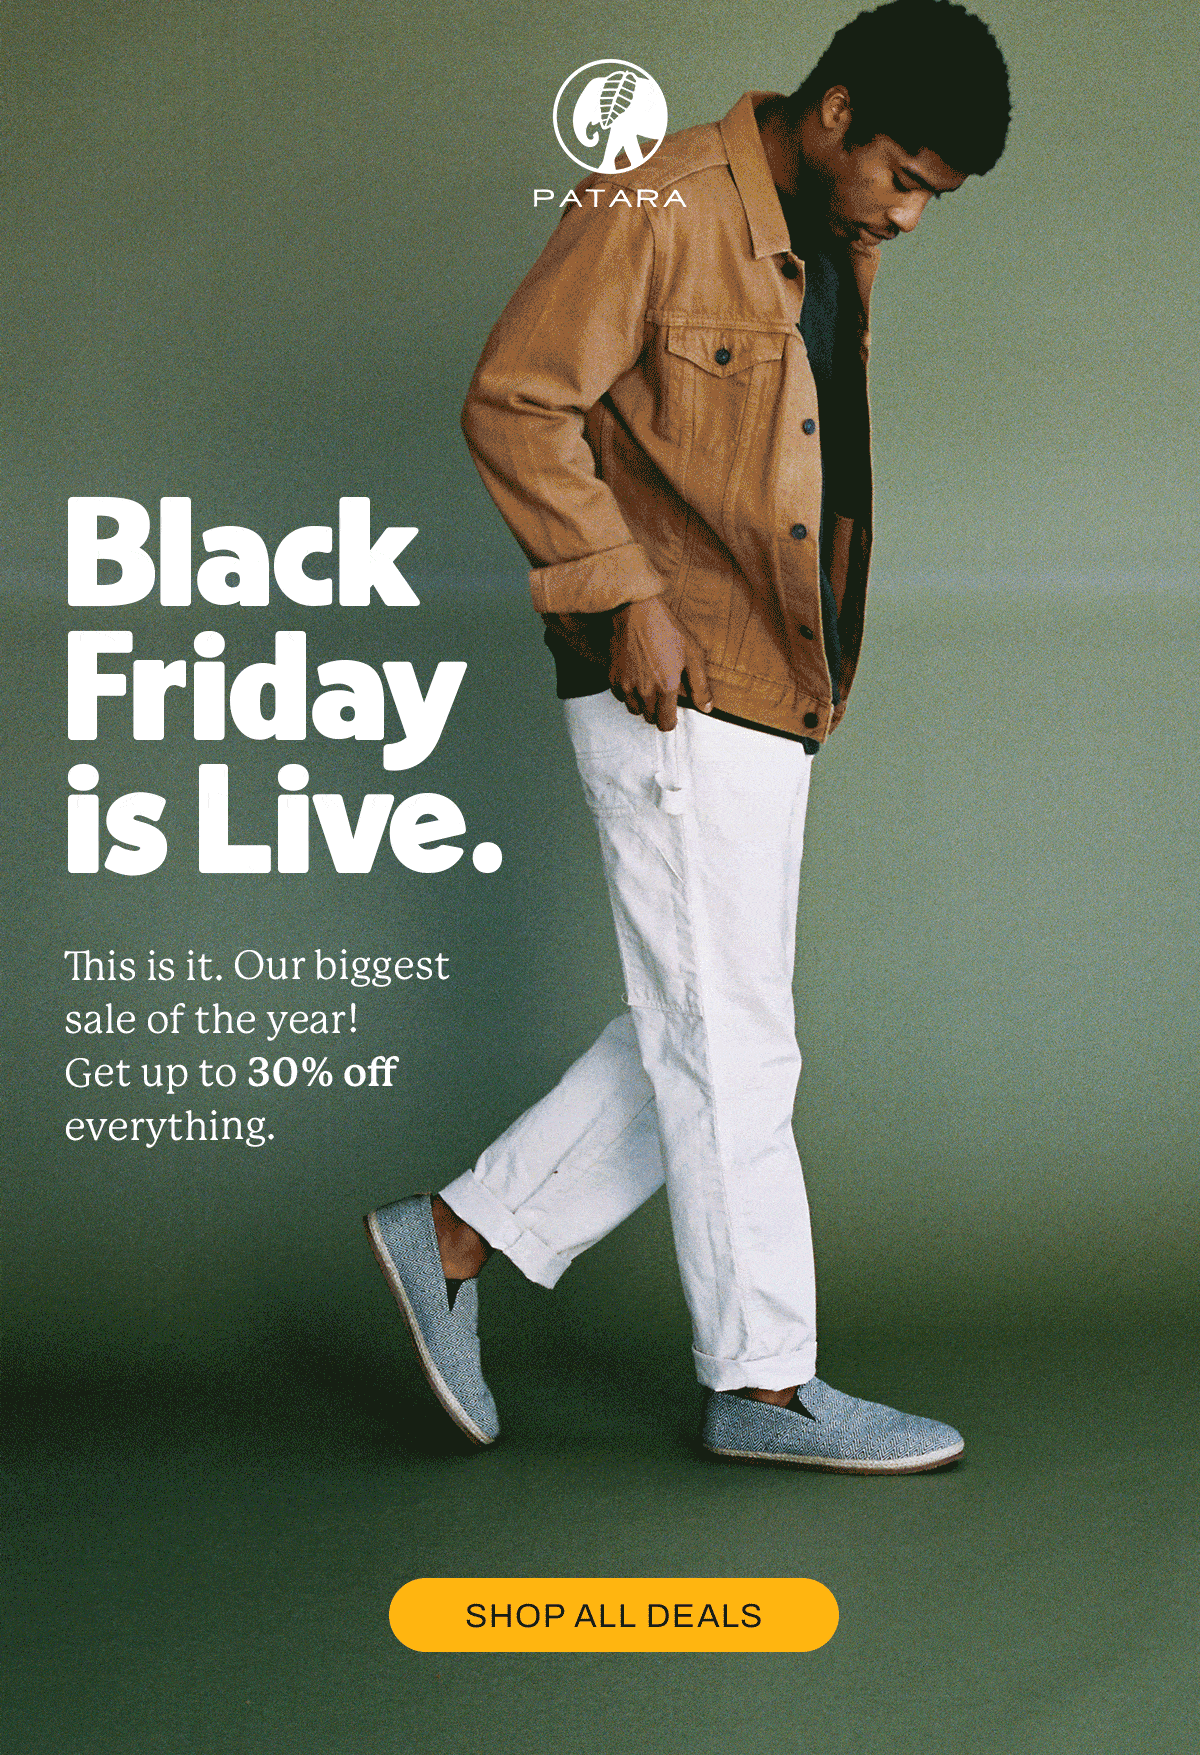  Friday is Live. This is it. Our biggest sale of the year! Get up to 30% off everything. SHOP ALL DEALS 